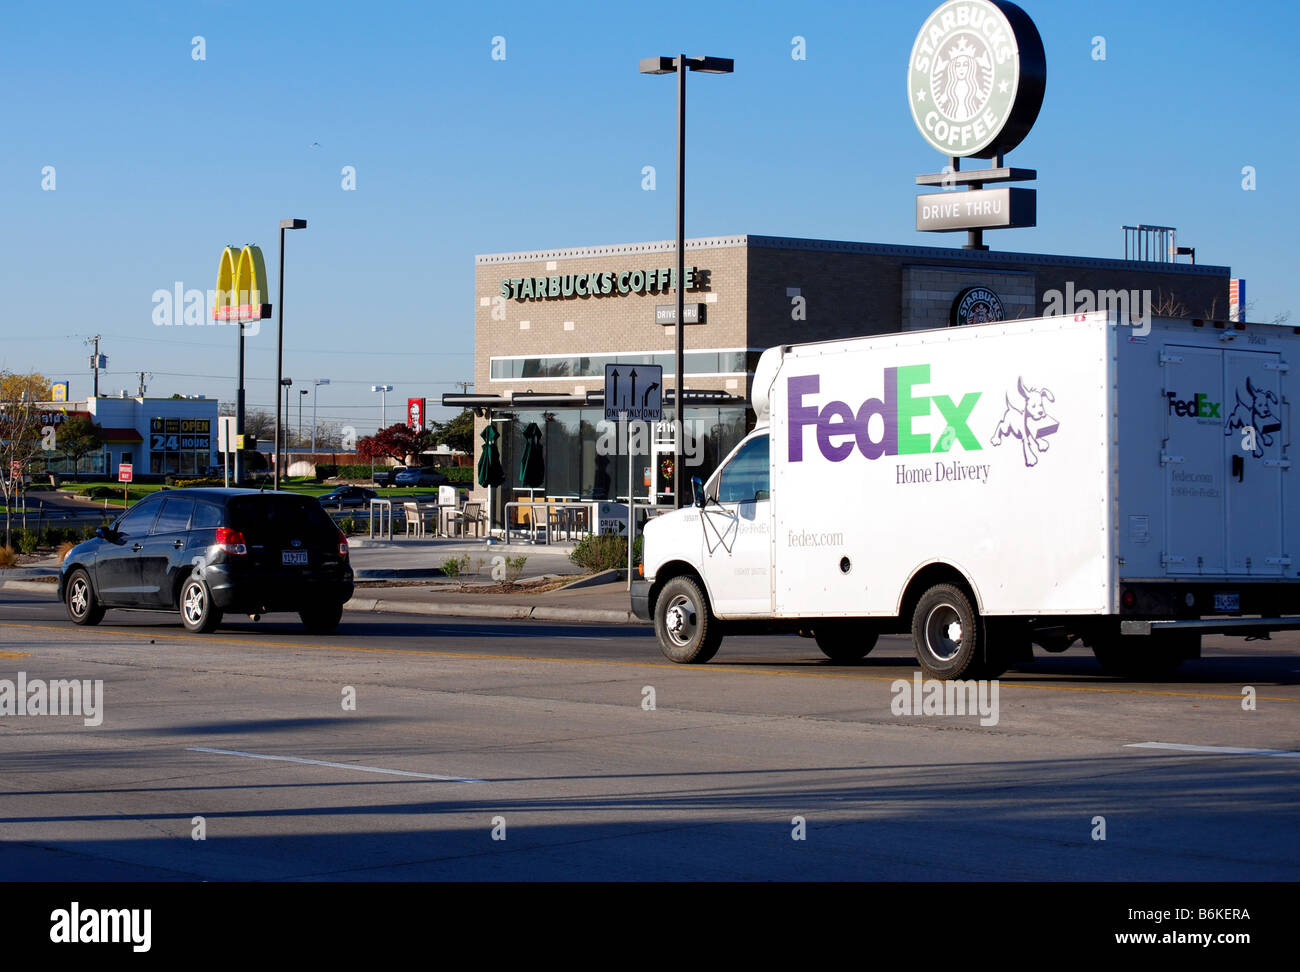 Fed Ex Truck in front of a Starbucks Store Stock Photo